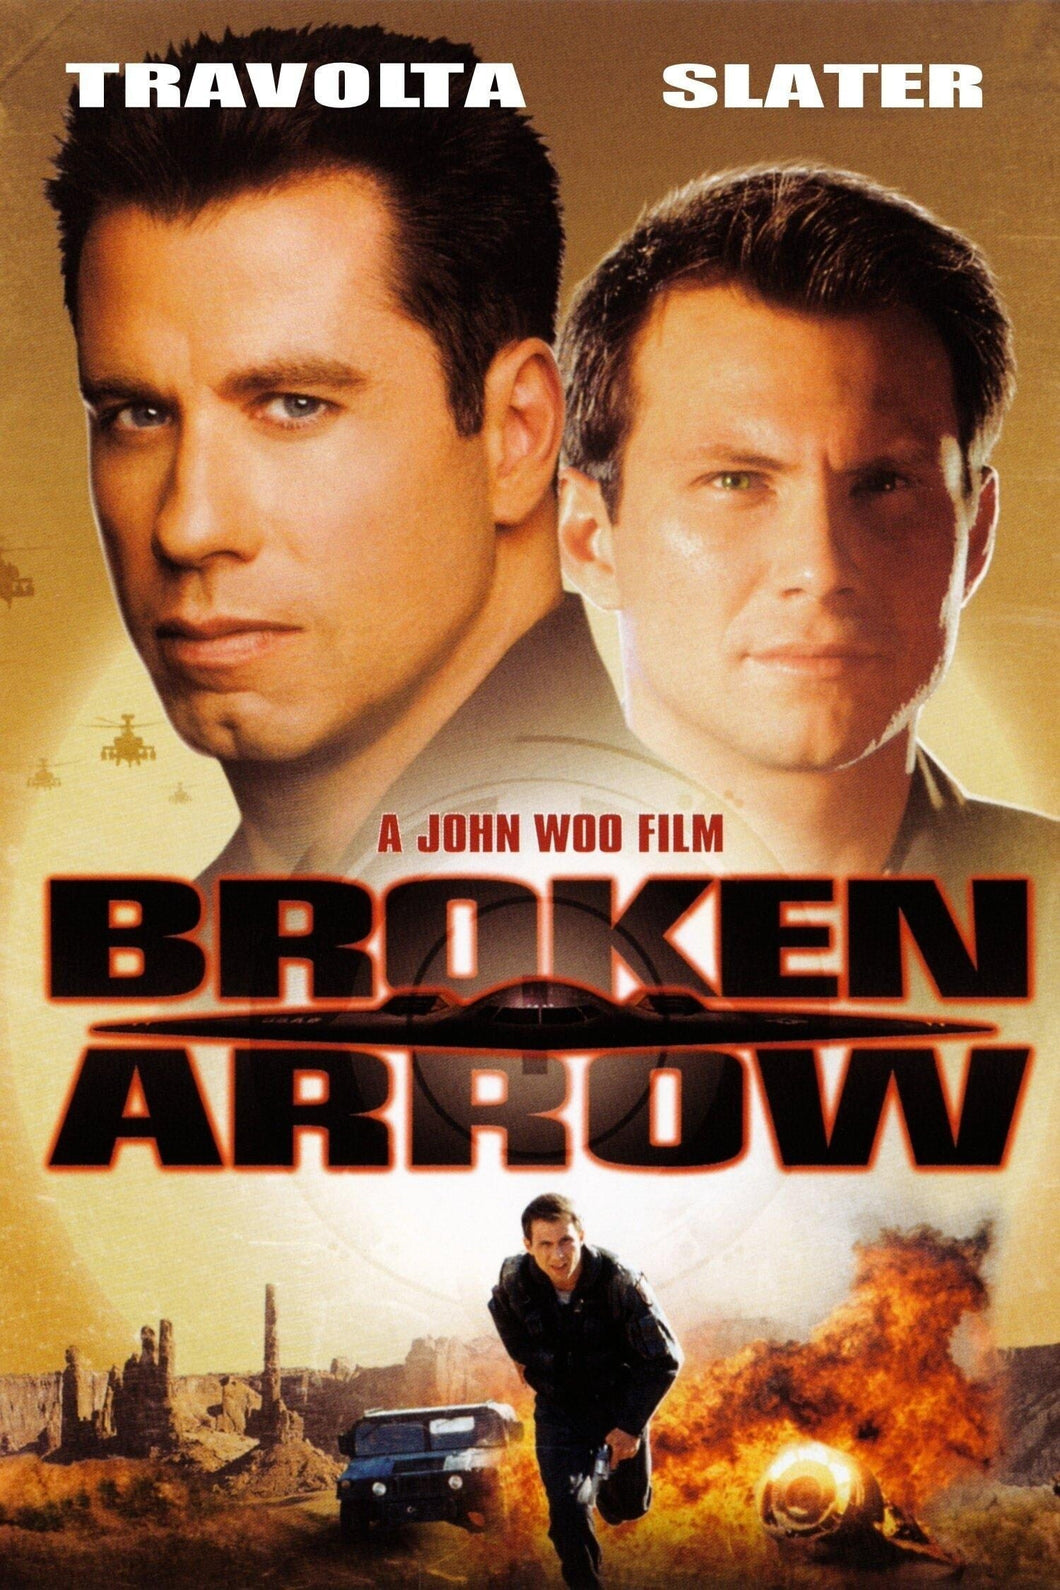 Broken Arrow (1996) Movie Poster High Quality Glossy Paper A1 A2 A3 A4 A3 Framed or Unframed!!!